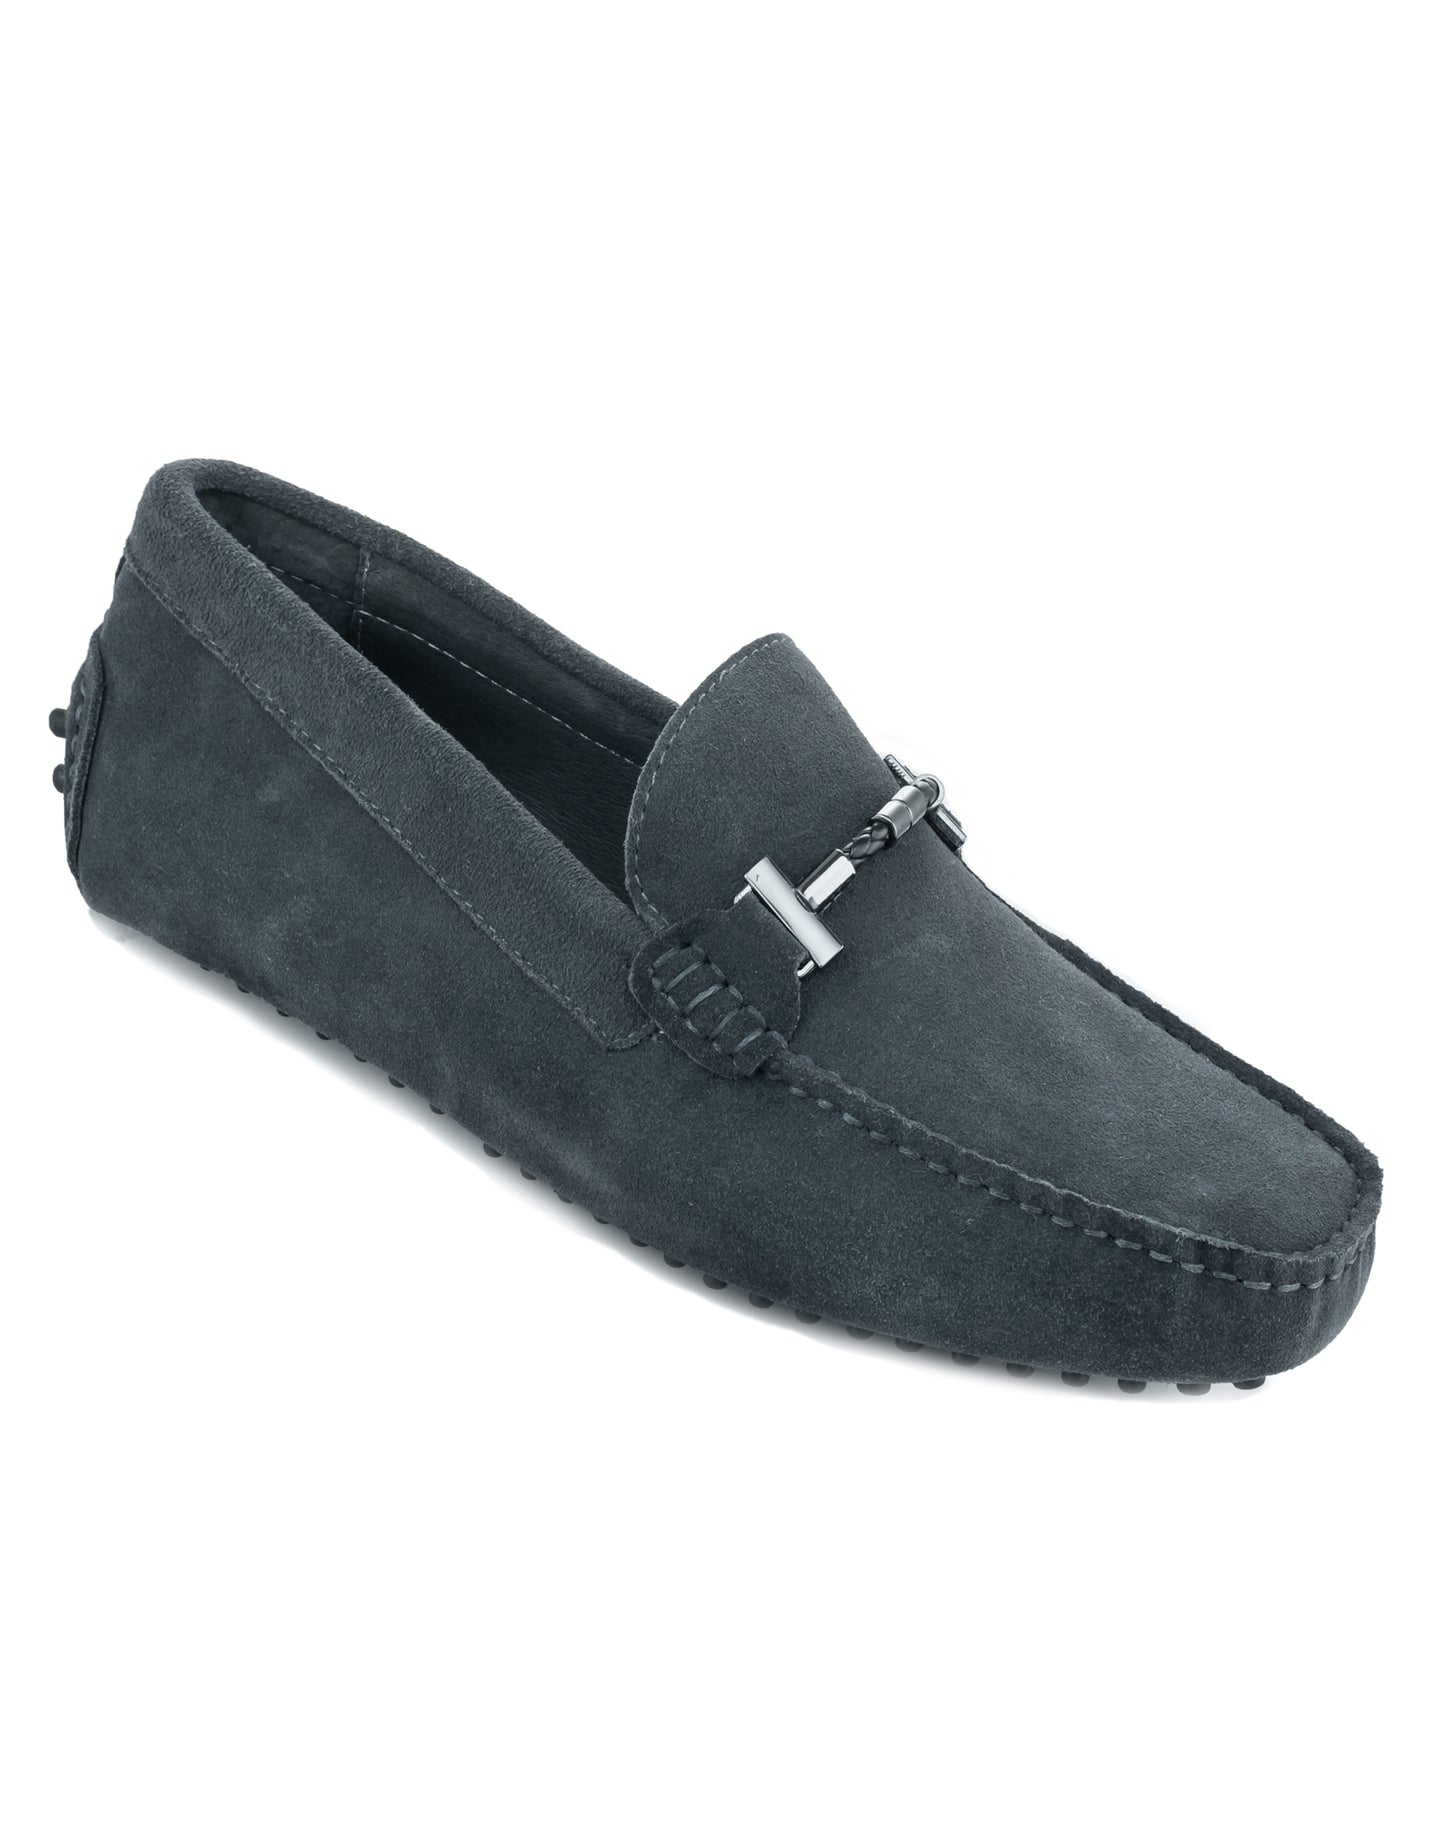 London Grey Suede ripped Loafer